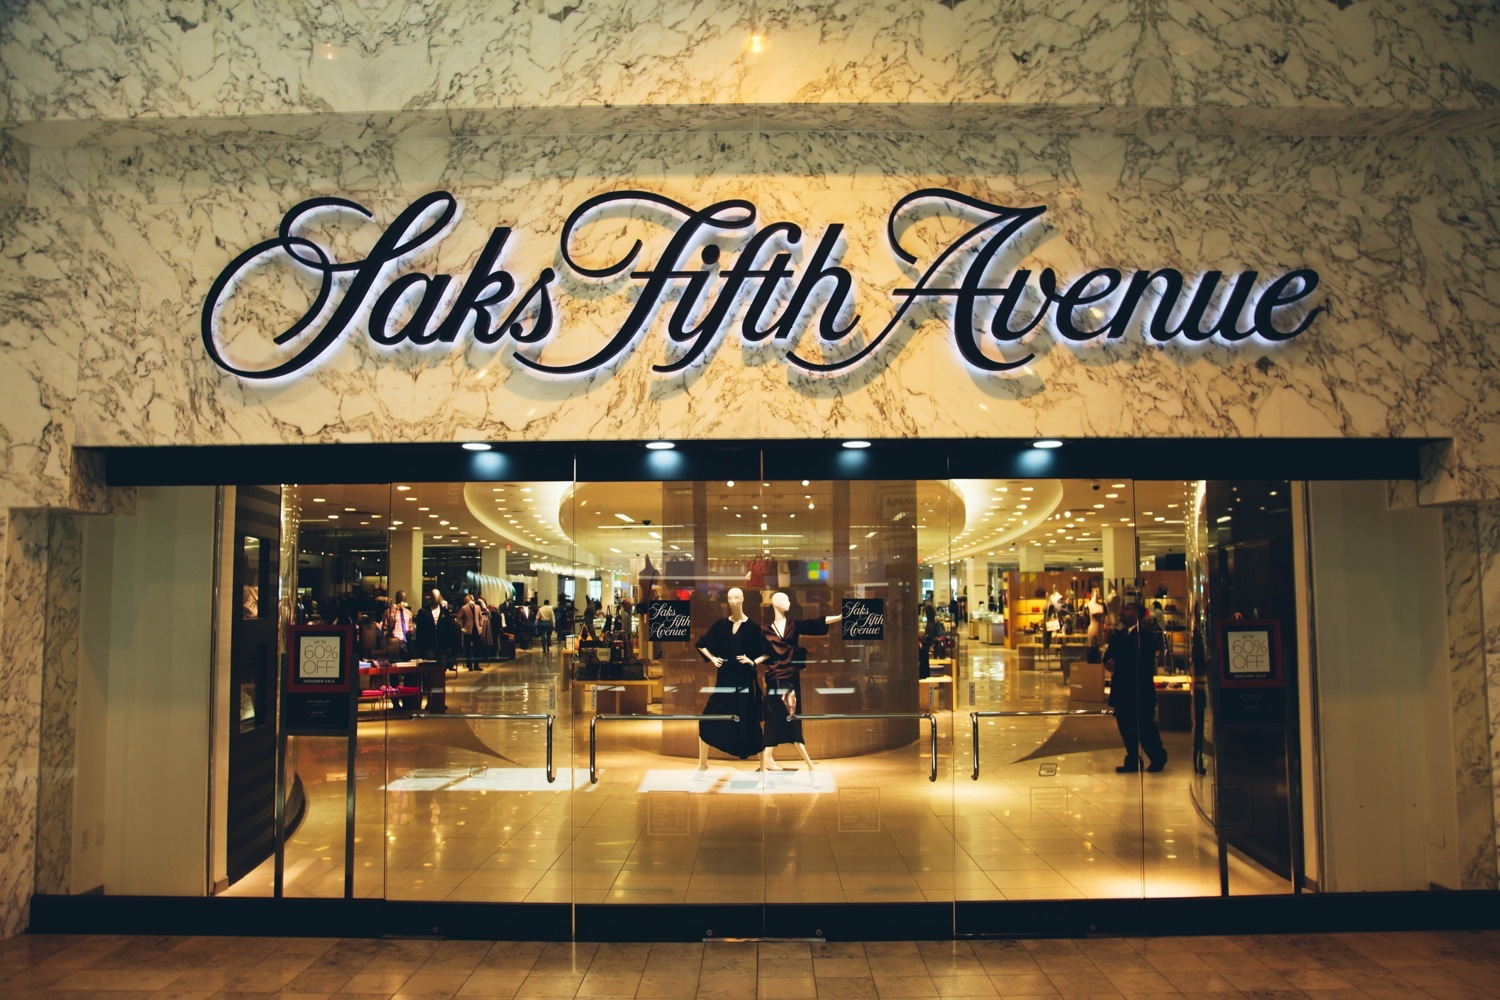 saks fifth avenue store